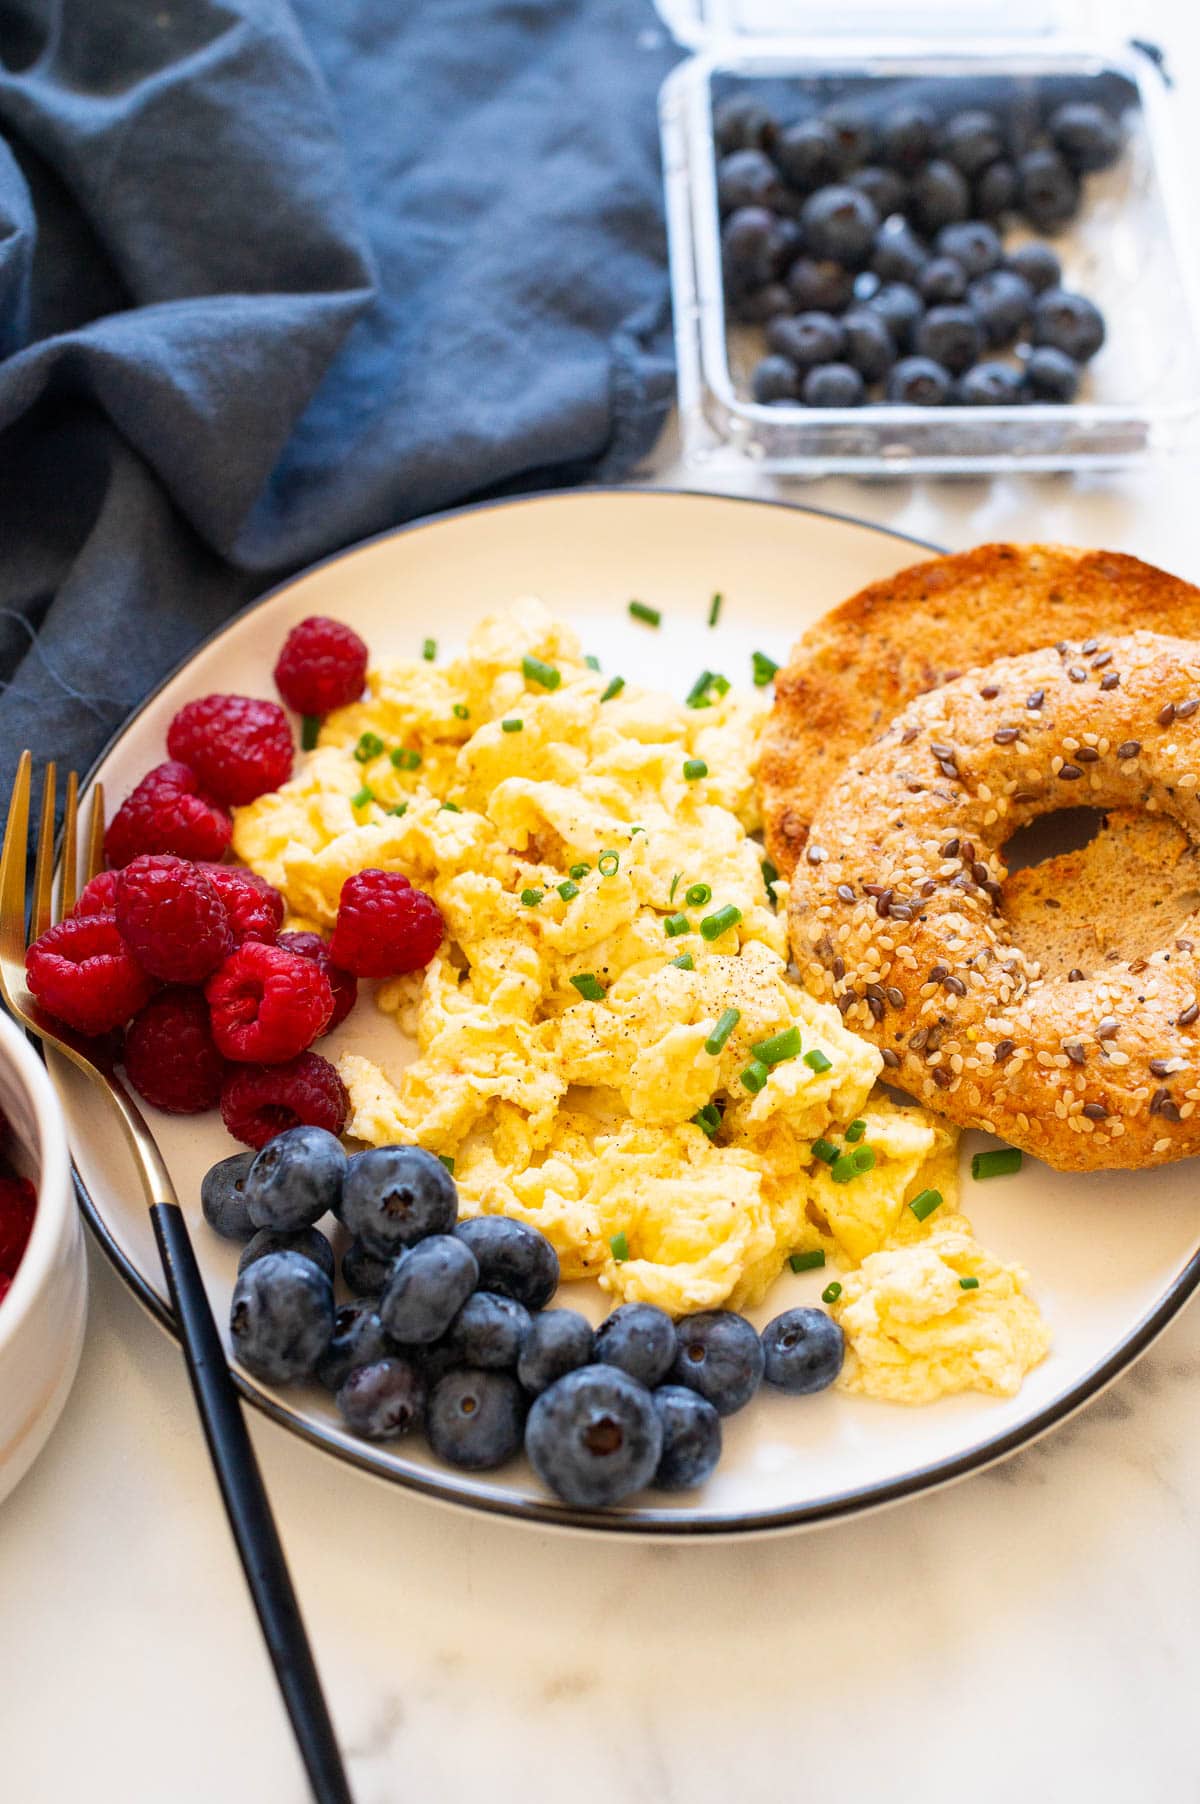 Side view of scrambled eggs garnished with chives and served on a plate with berries and toast. Napkin and berries in a container on a counter.